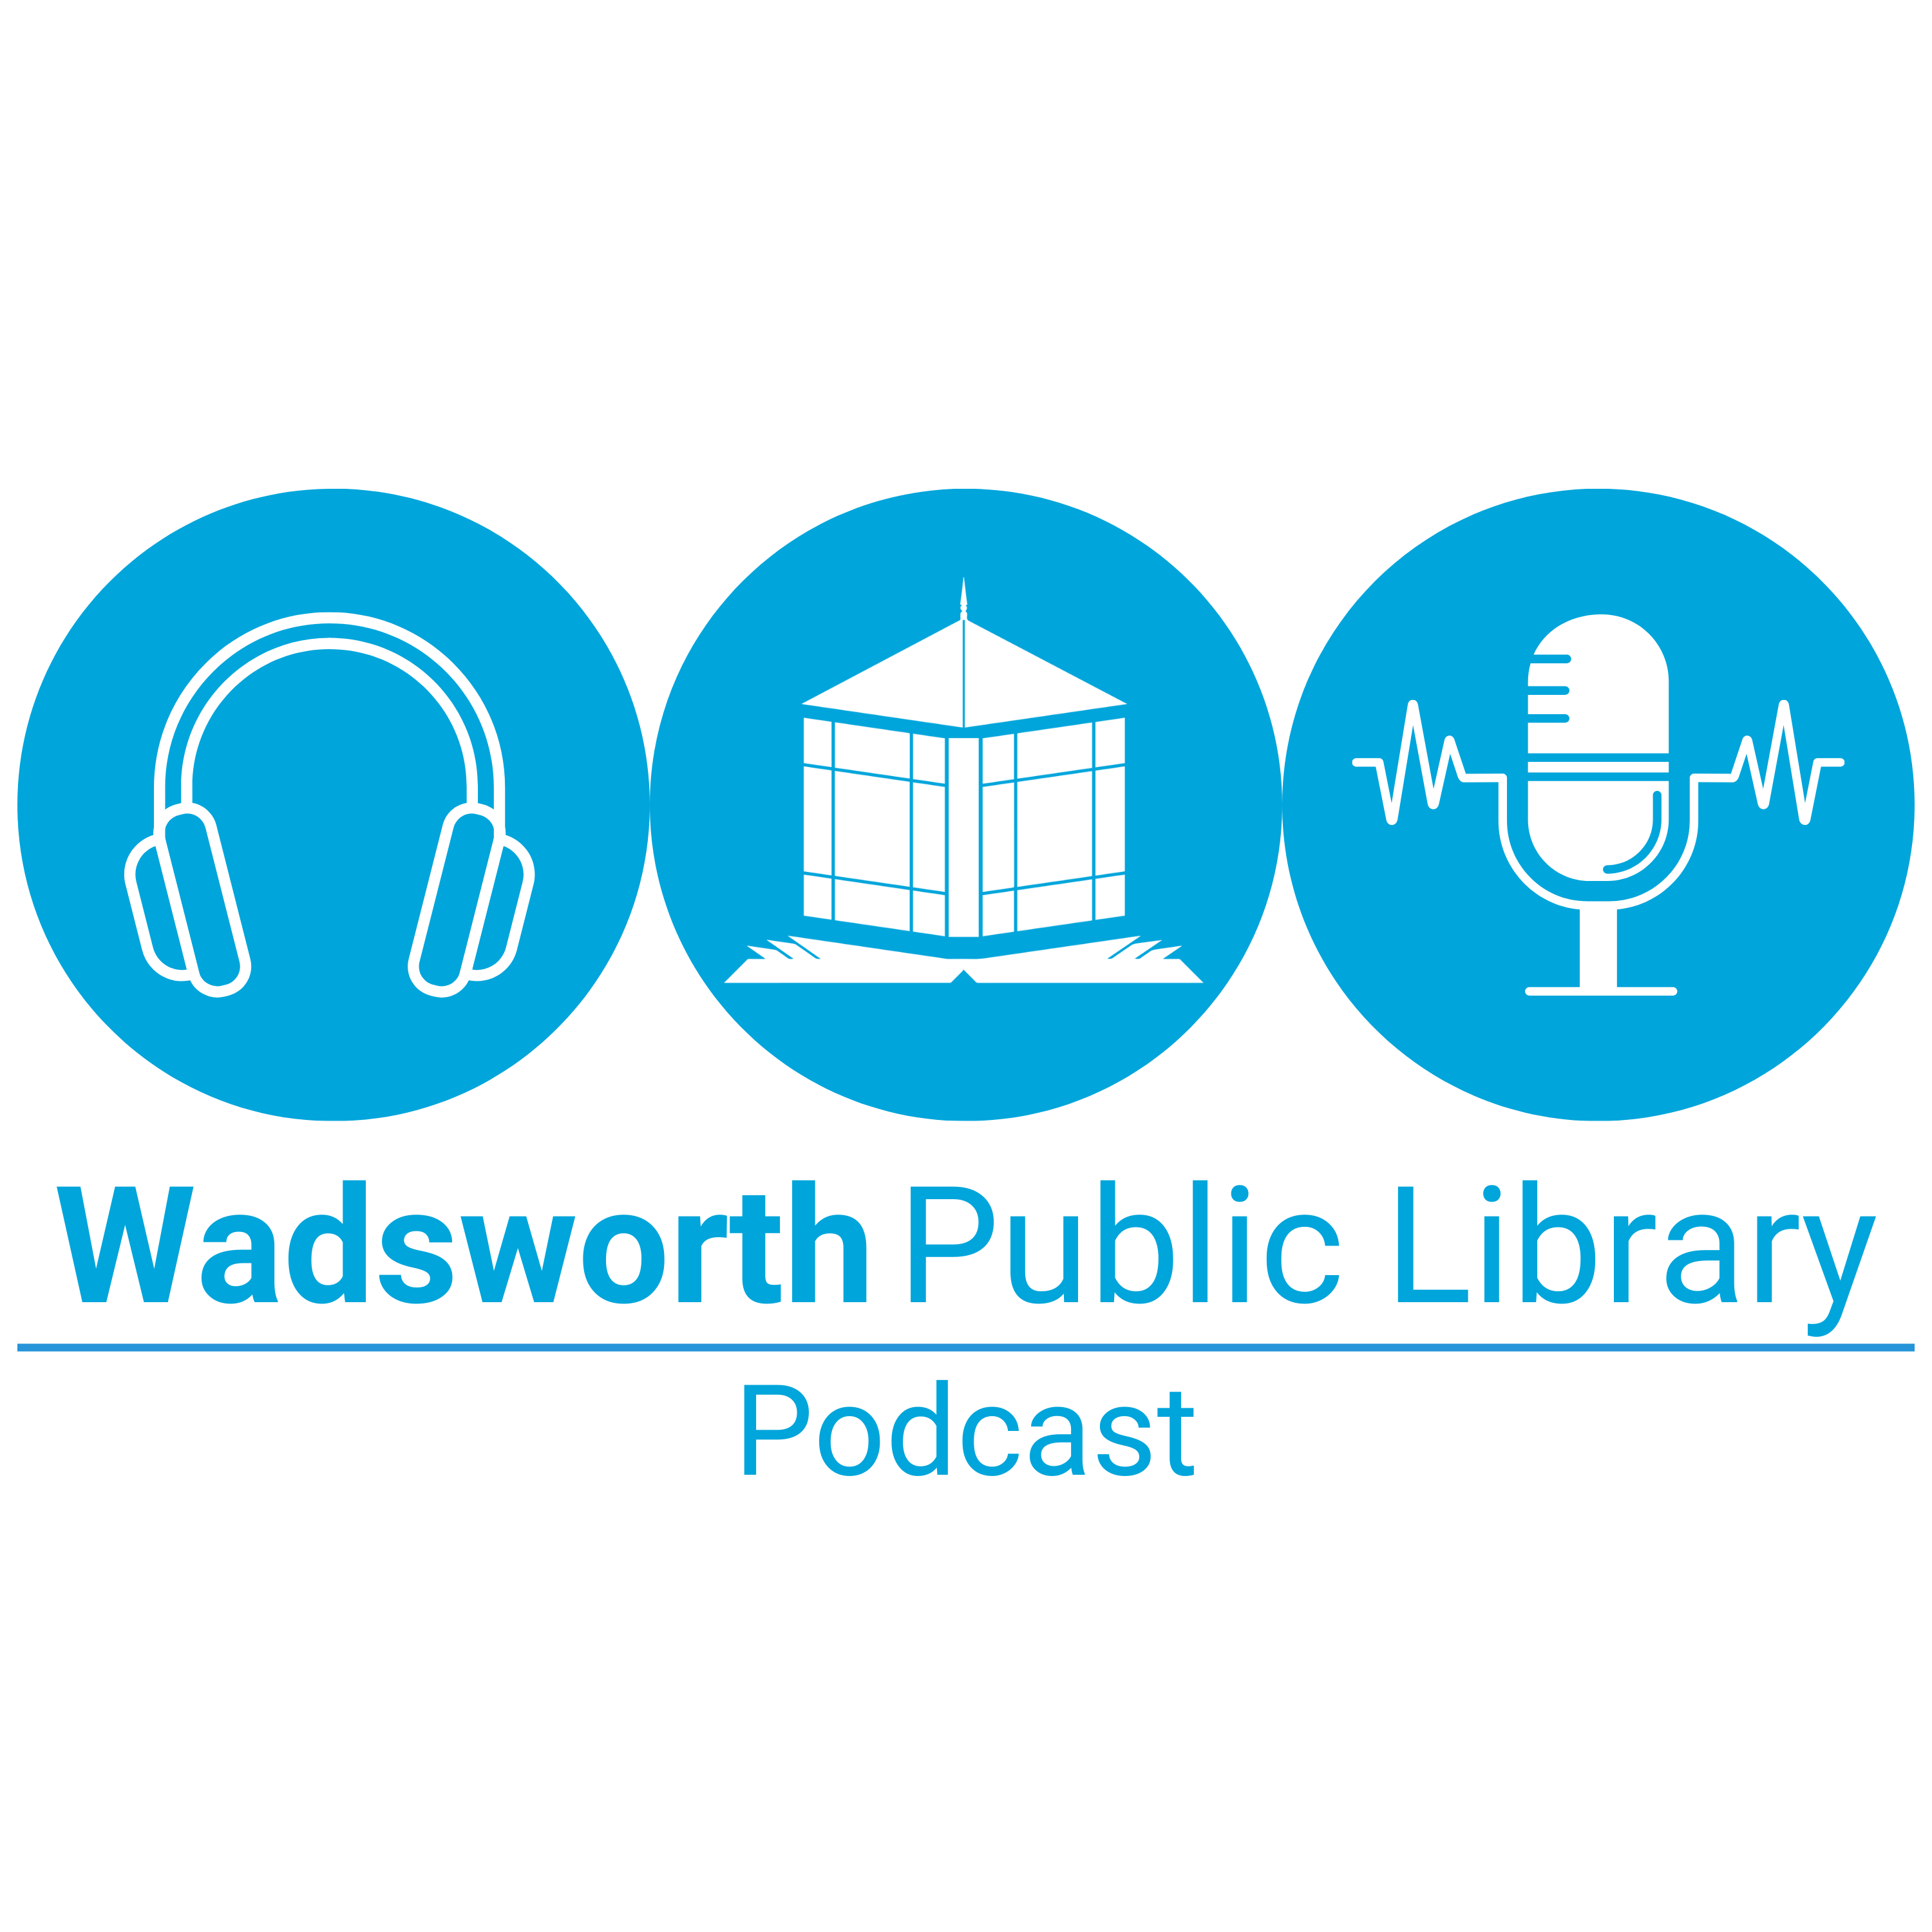 Wadsworth Public Library Podcast